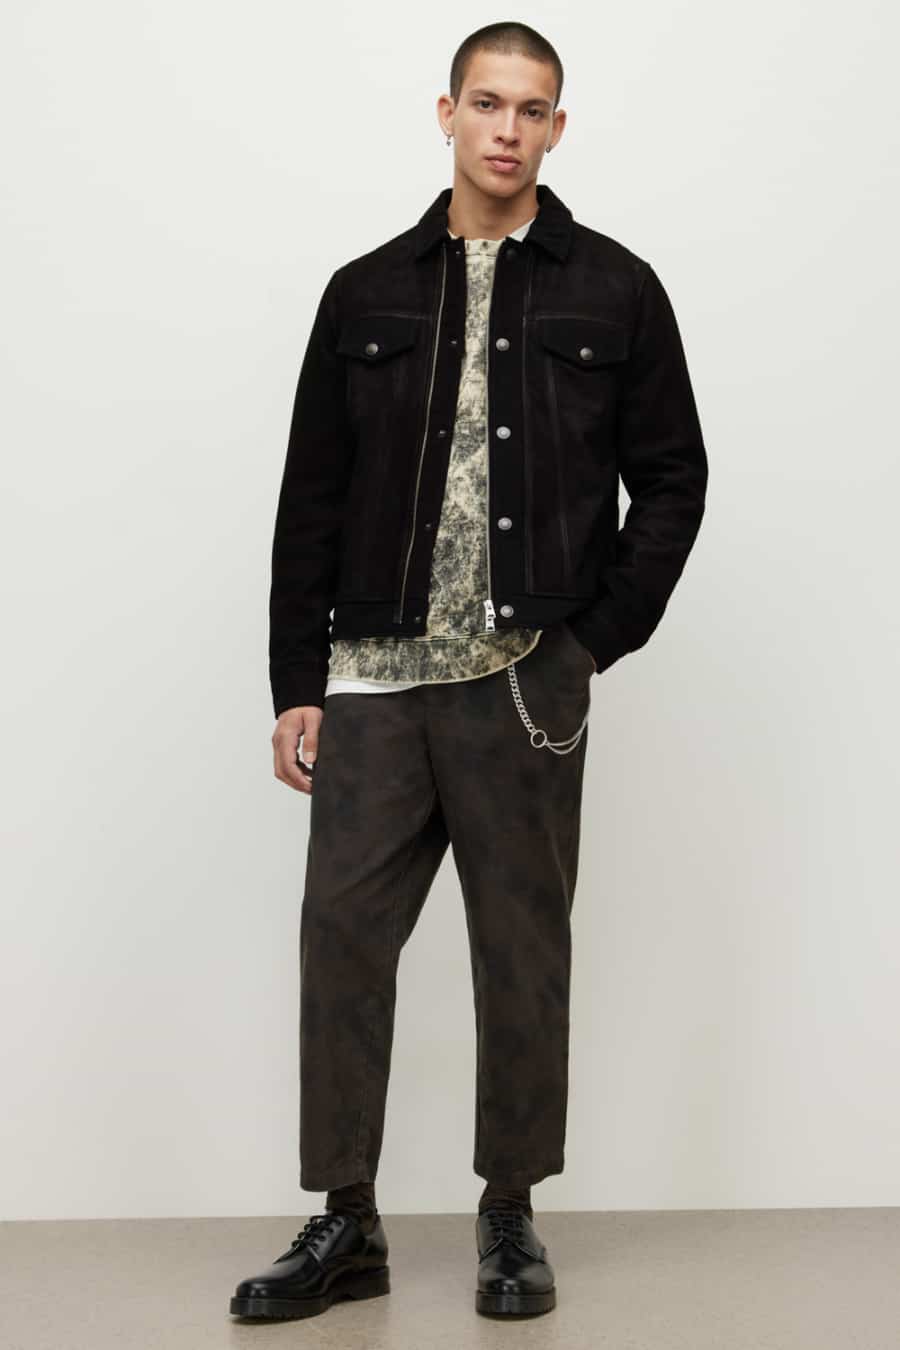 Men's wide-leg chinos, acid wash sweatshirt, black suede trucker jacket and black chunky Derby shoes outfit